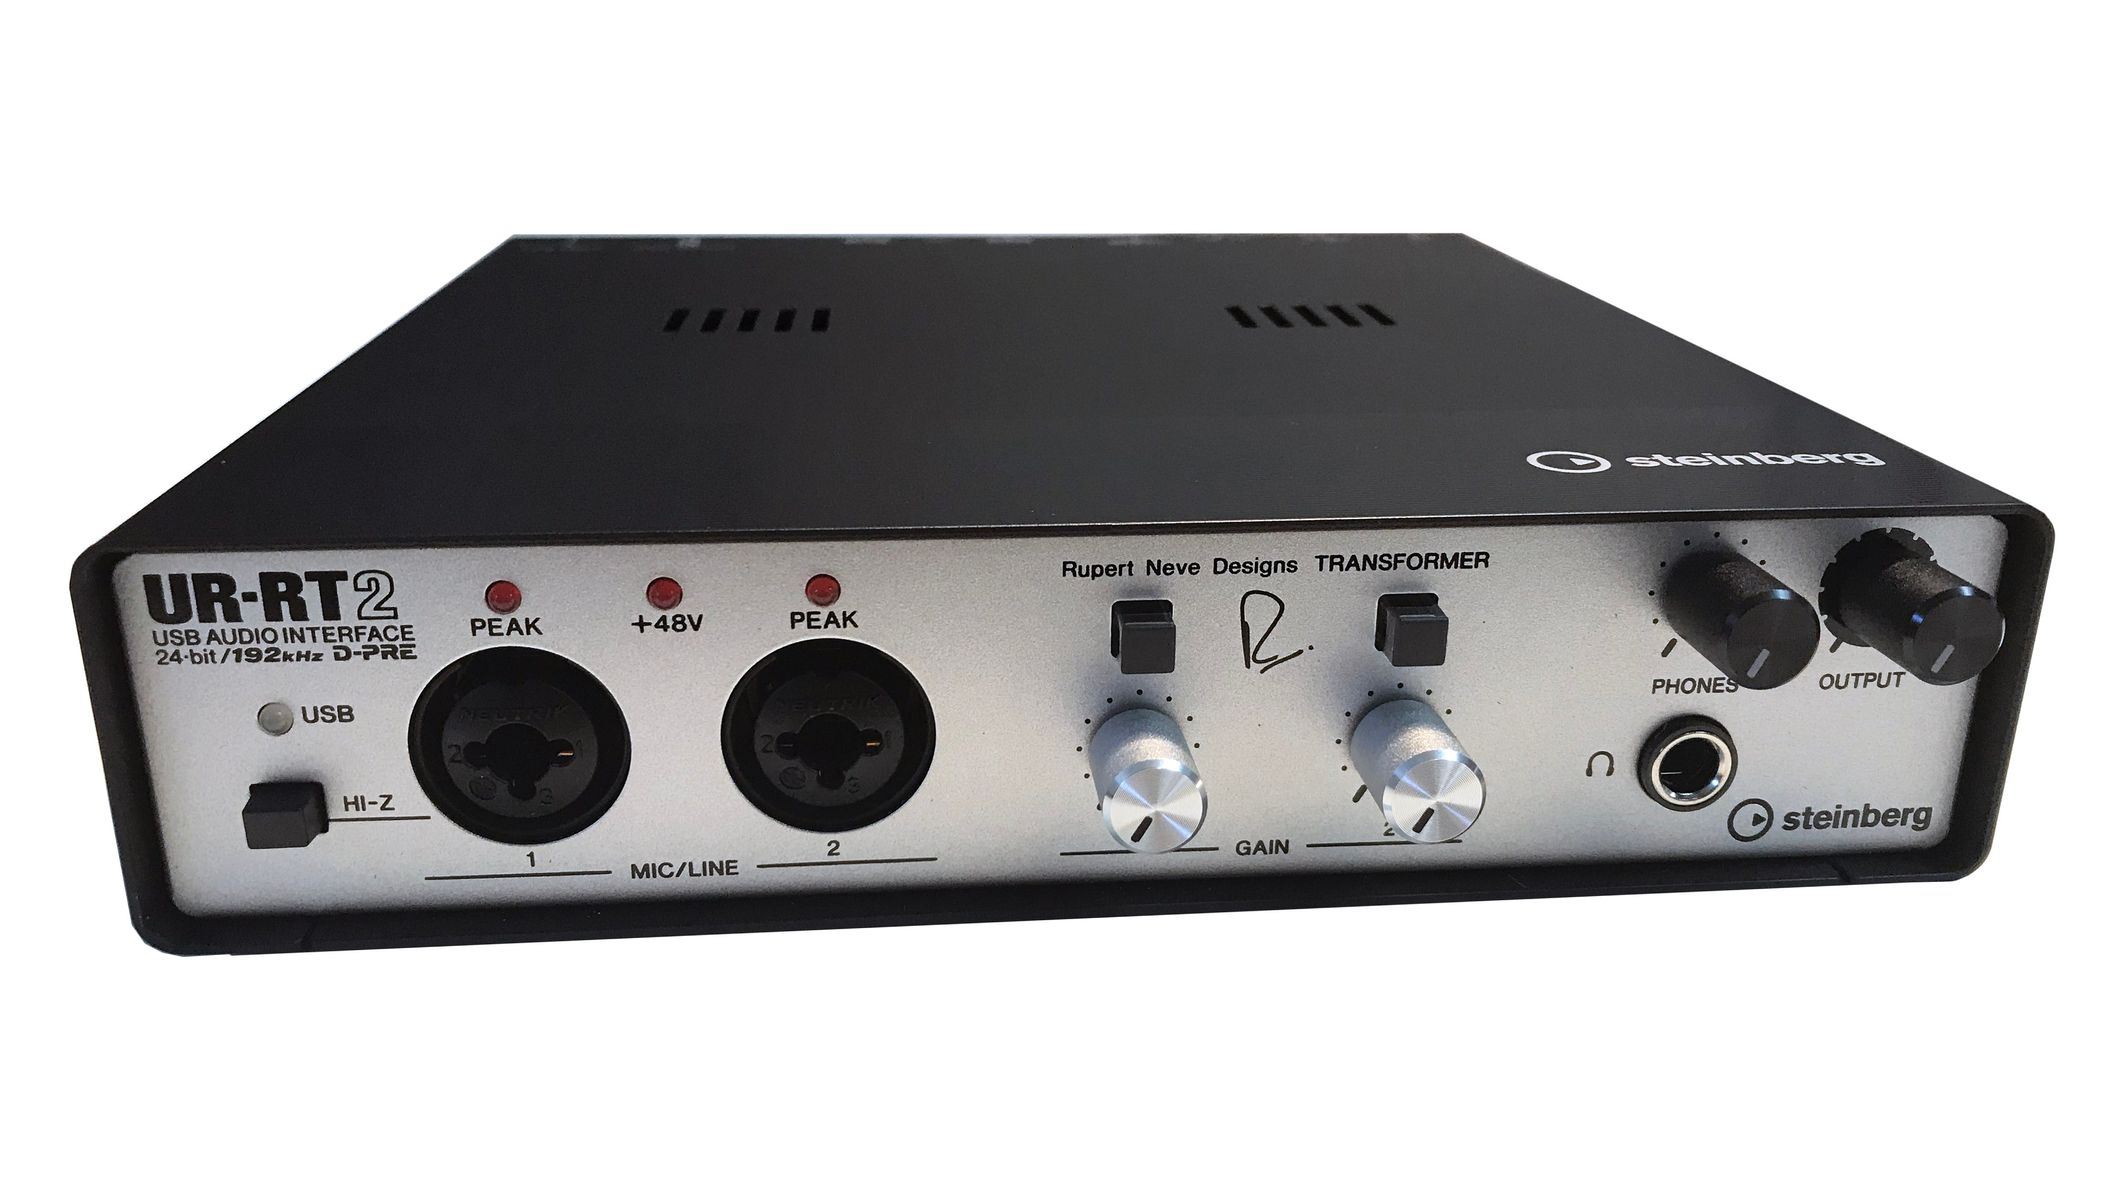 The Steinberg UR-RT2 USB Audio Interface is available at Hollywood Sound Systems.